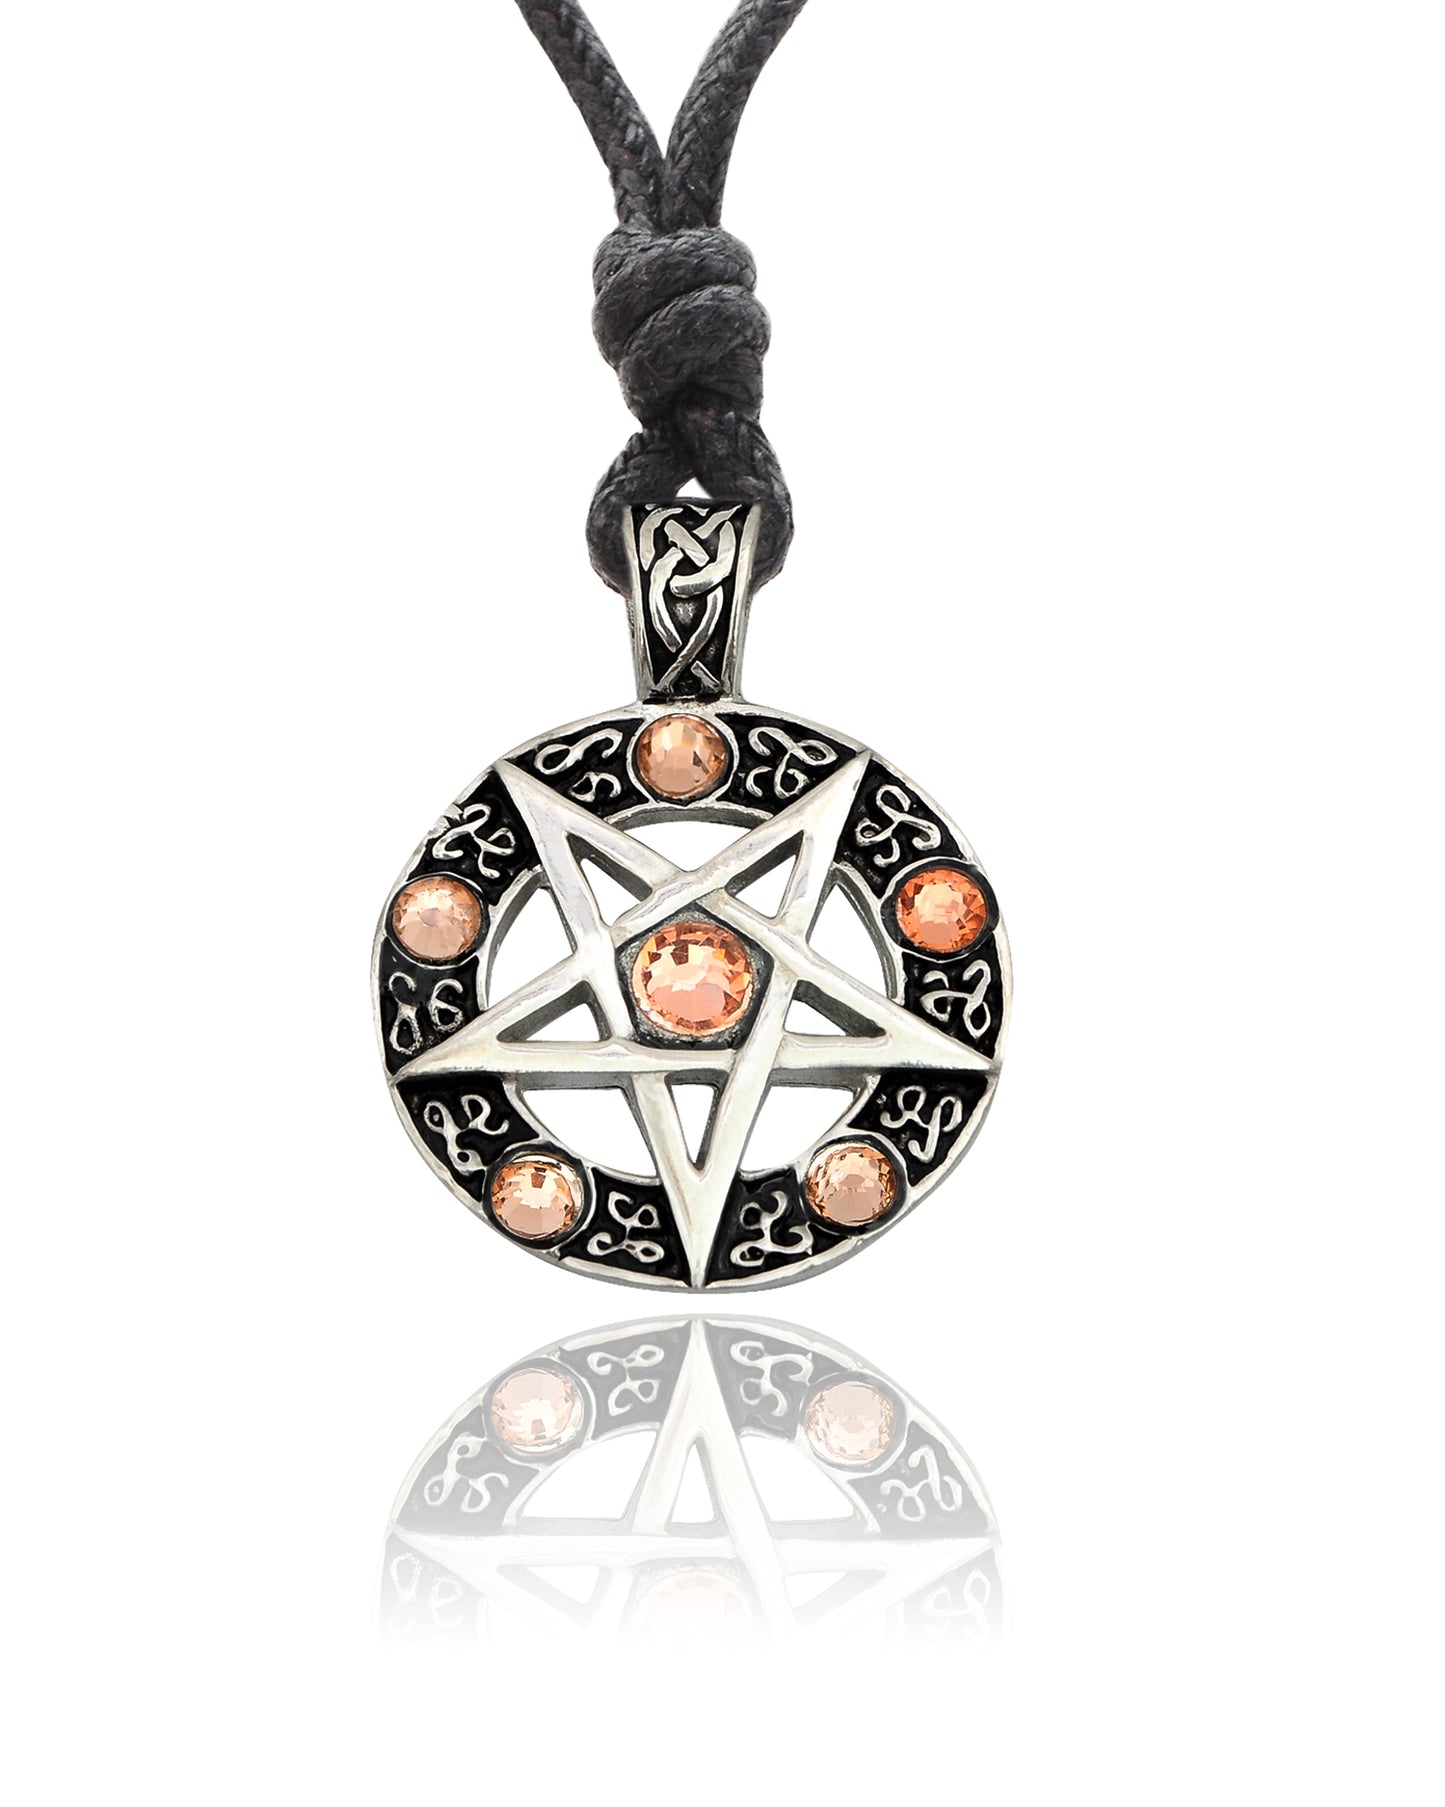 Pentagram Silver Pewter Charm Necklace Pendant Jewelry